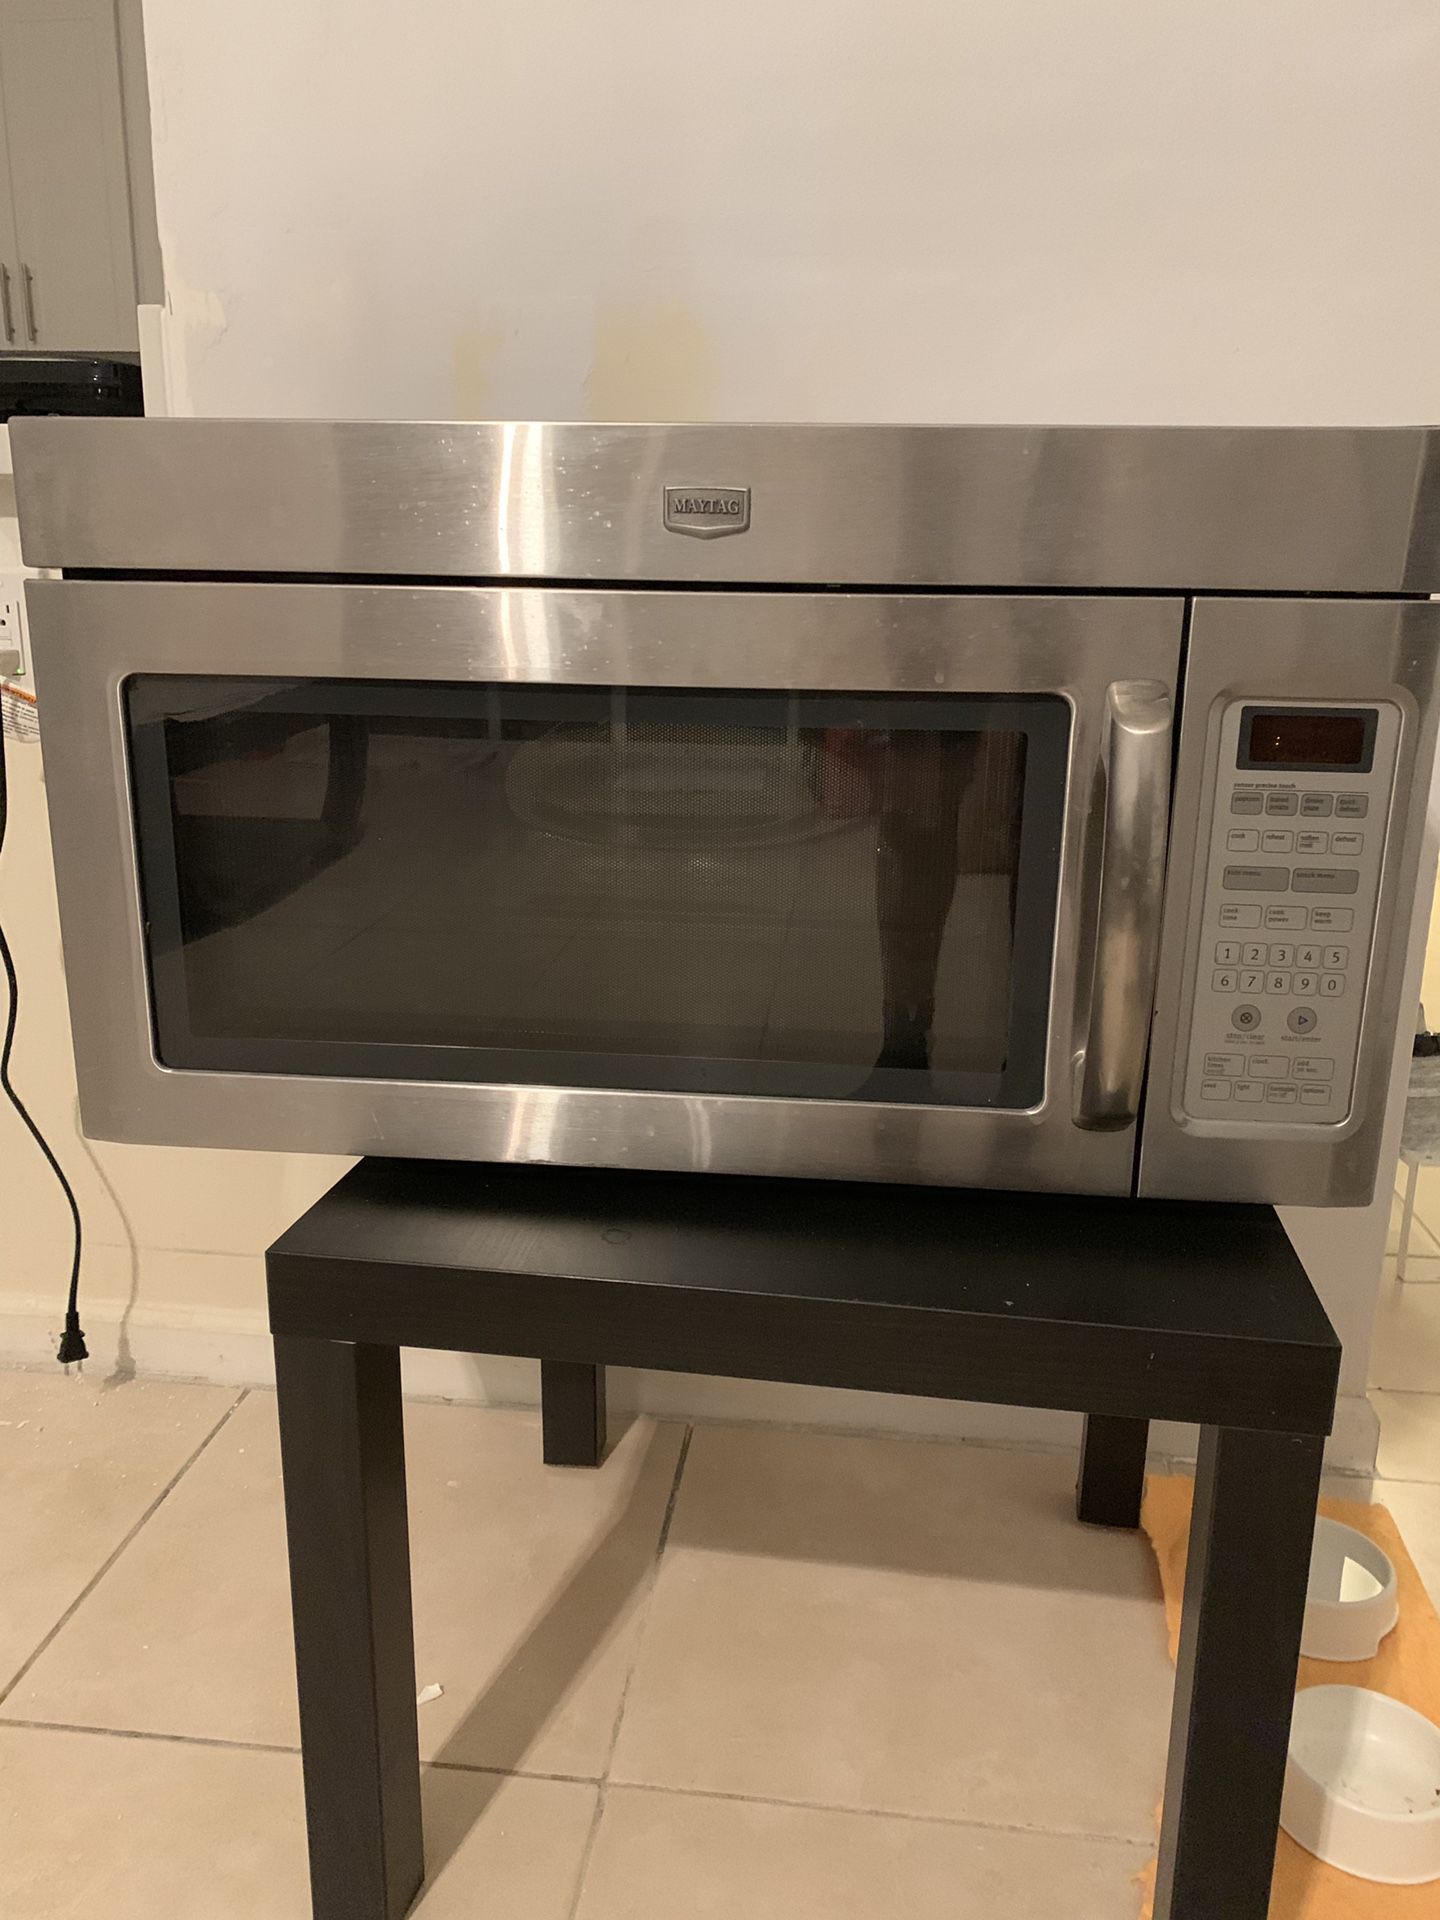 Maytag microwave oven